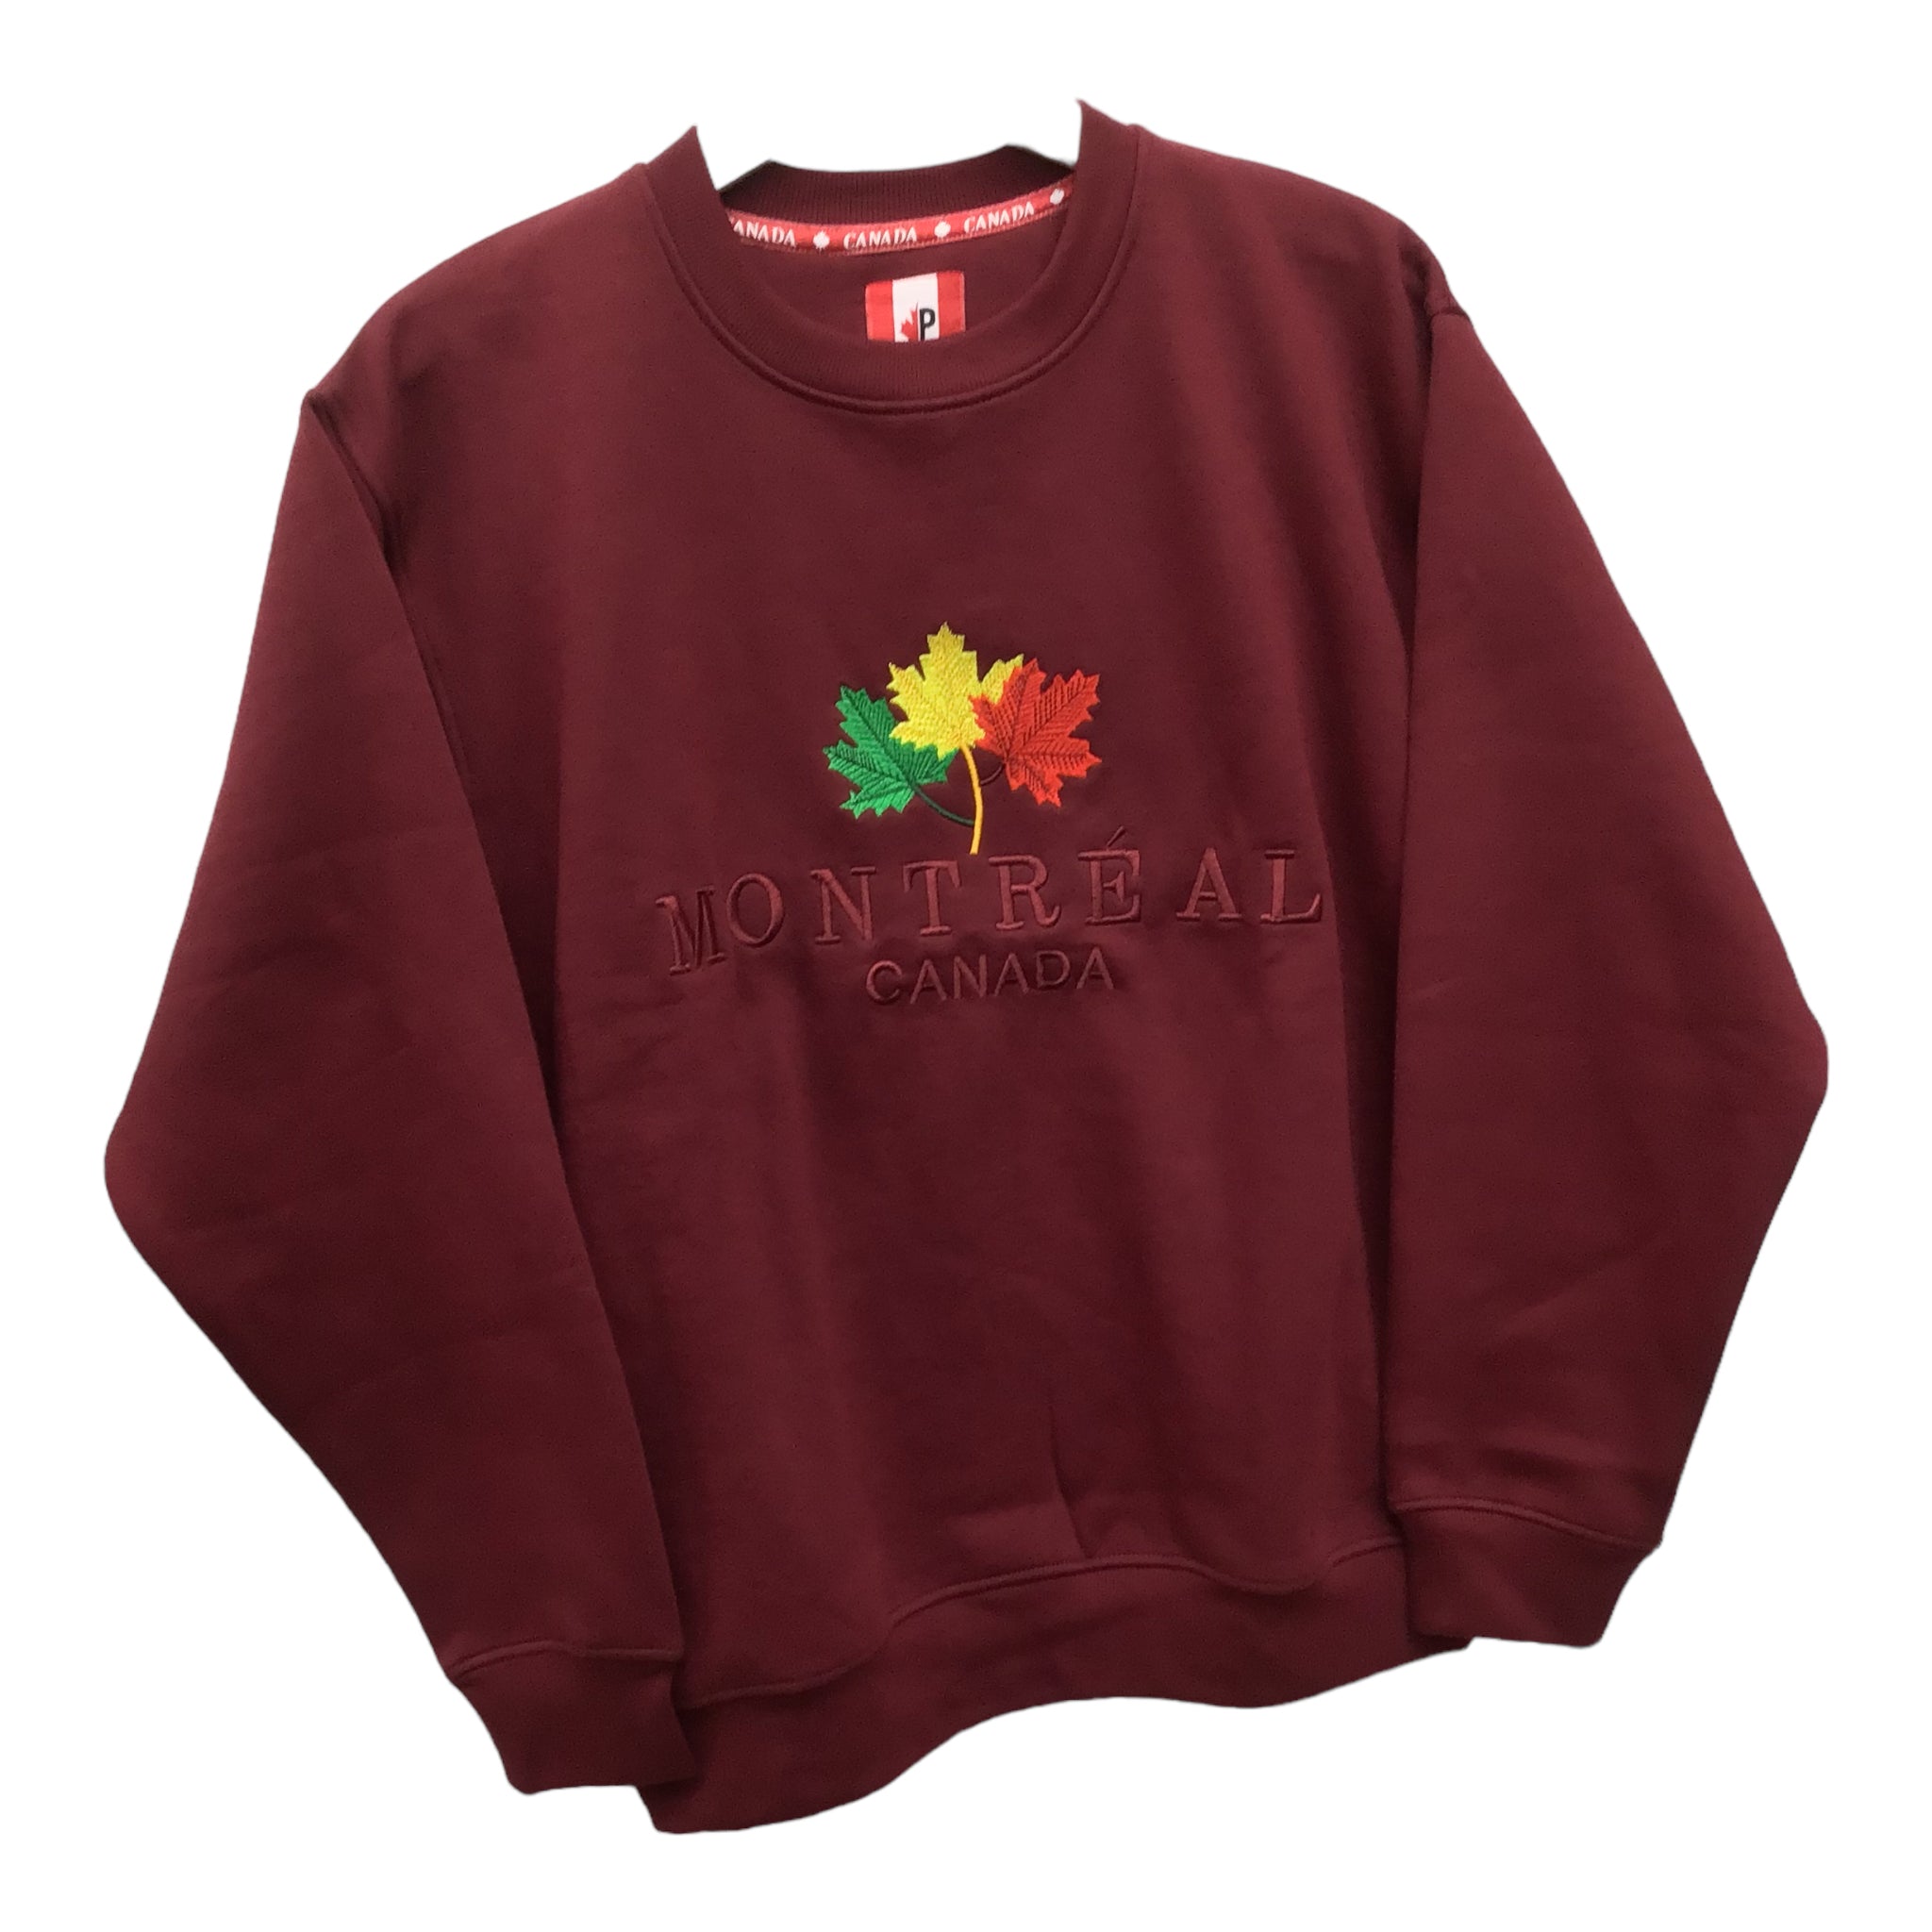 Montreal Crew Neck Sweatshirt Burgundy W/ Red Green & Yellow Maple Leaf Embroidery for Men and Women